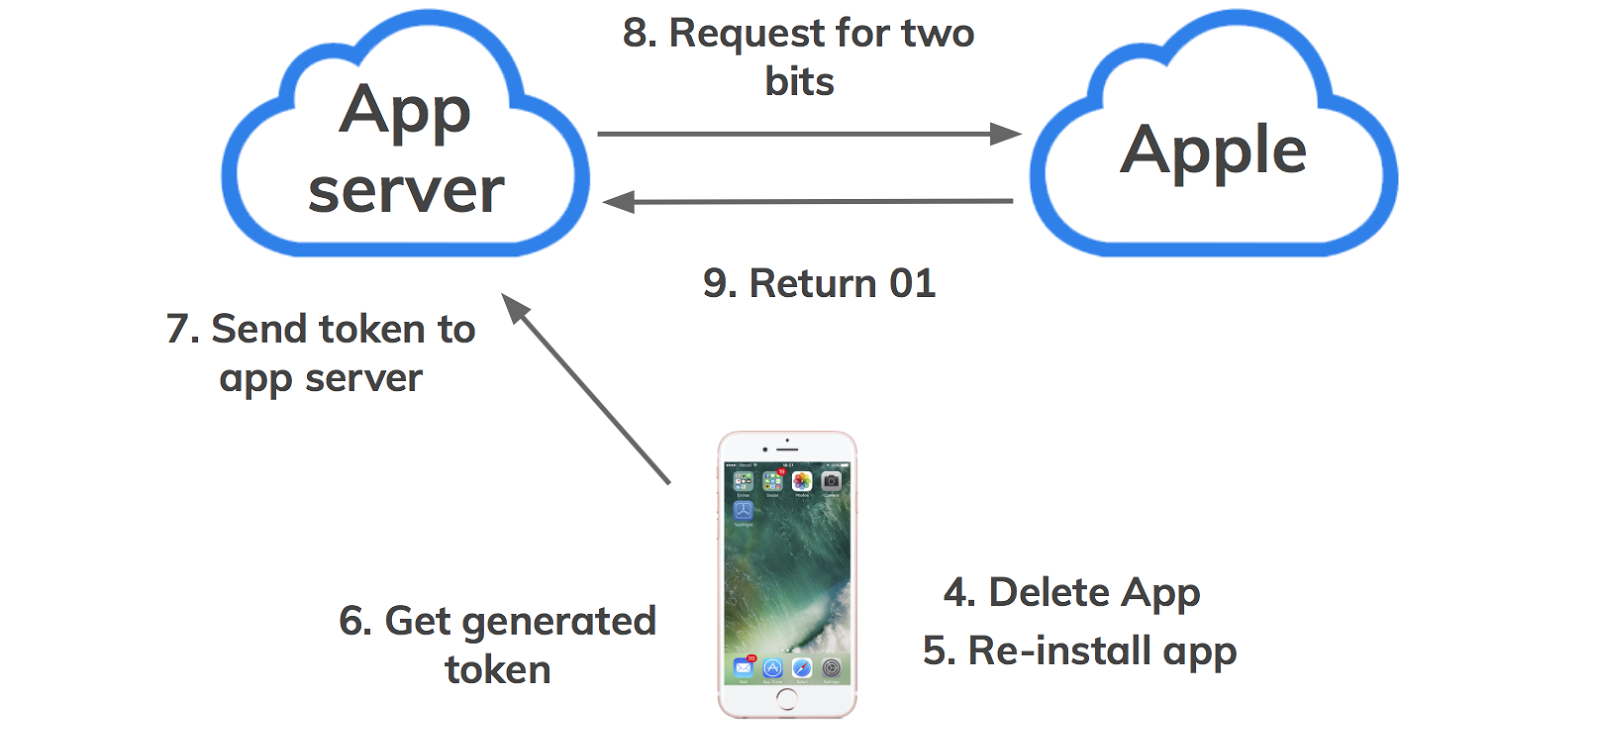 User Data Privacy in iOS: Why and How To - Lemberg Solutions